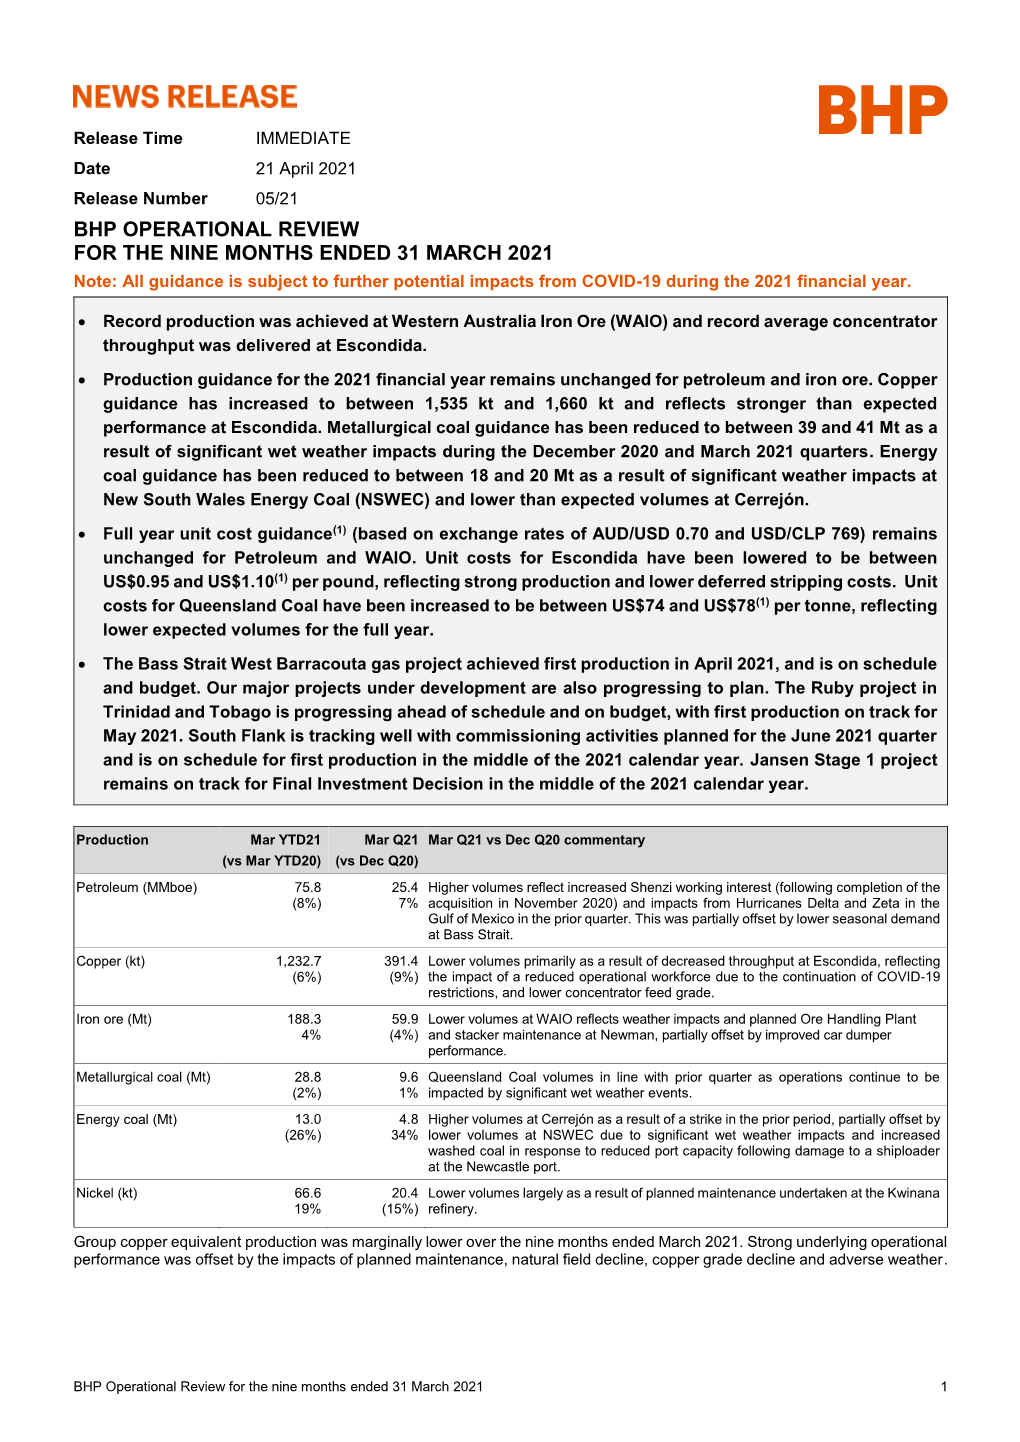 BHP OPERATIONAL REVIEW for the NINE MONTHS ENDED 31 MARCH 2021 Note: All Guidance Is Subject to Further Potential Impacts from COVID-19 During the 2021 Financial Year